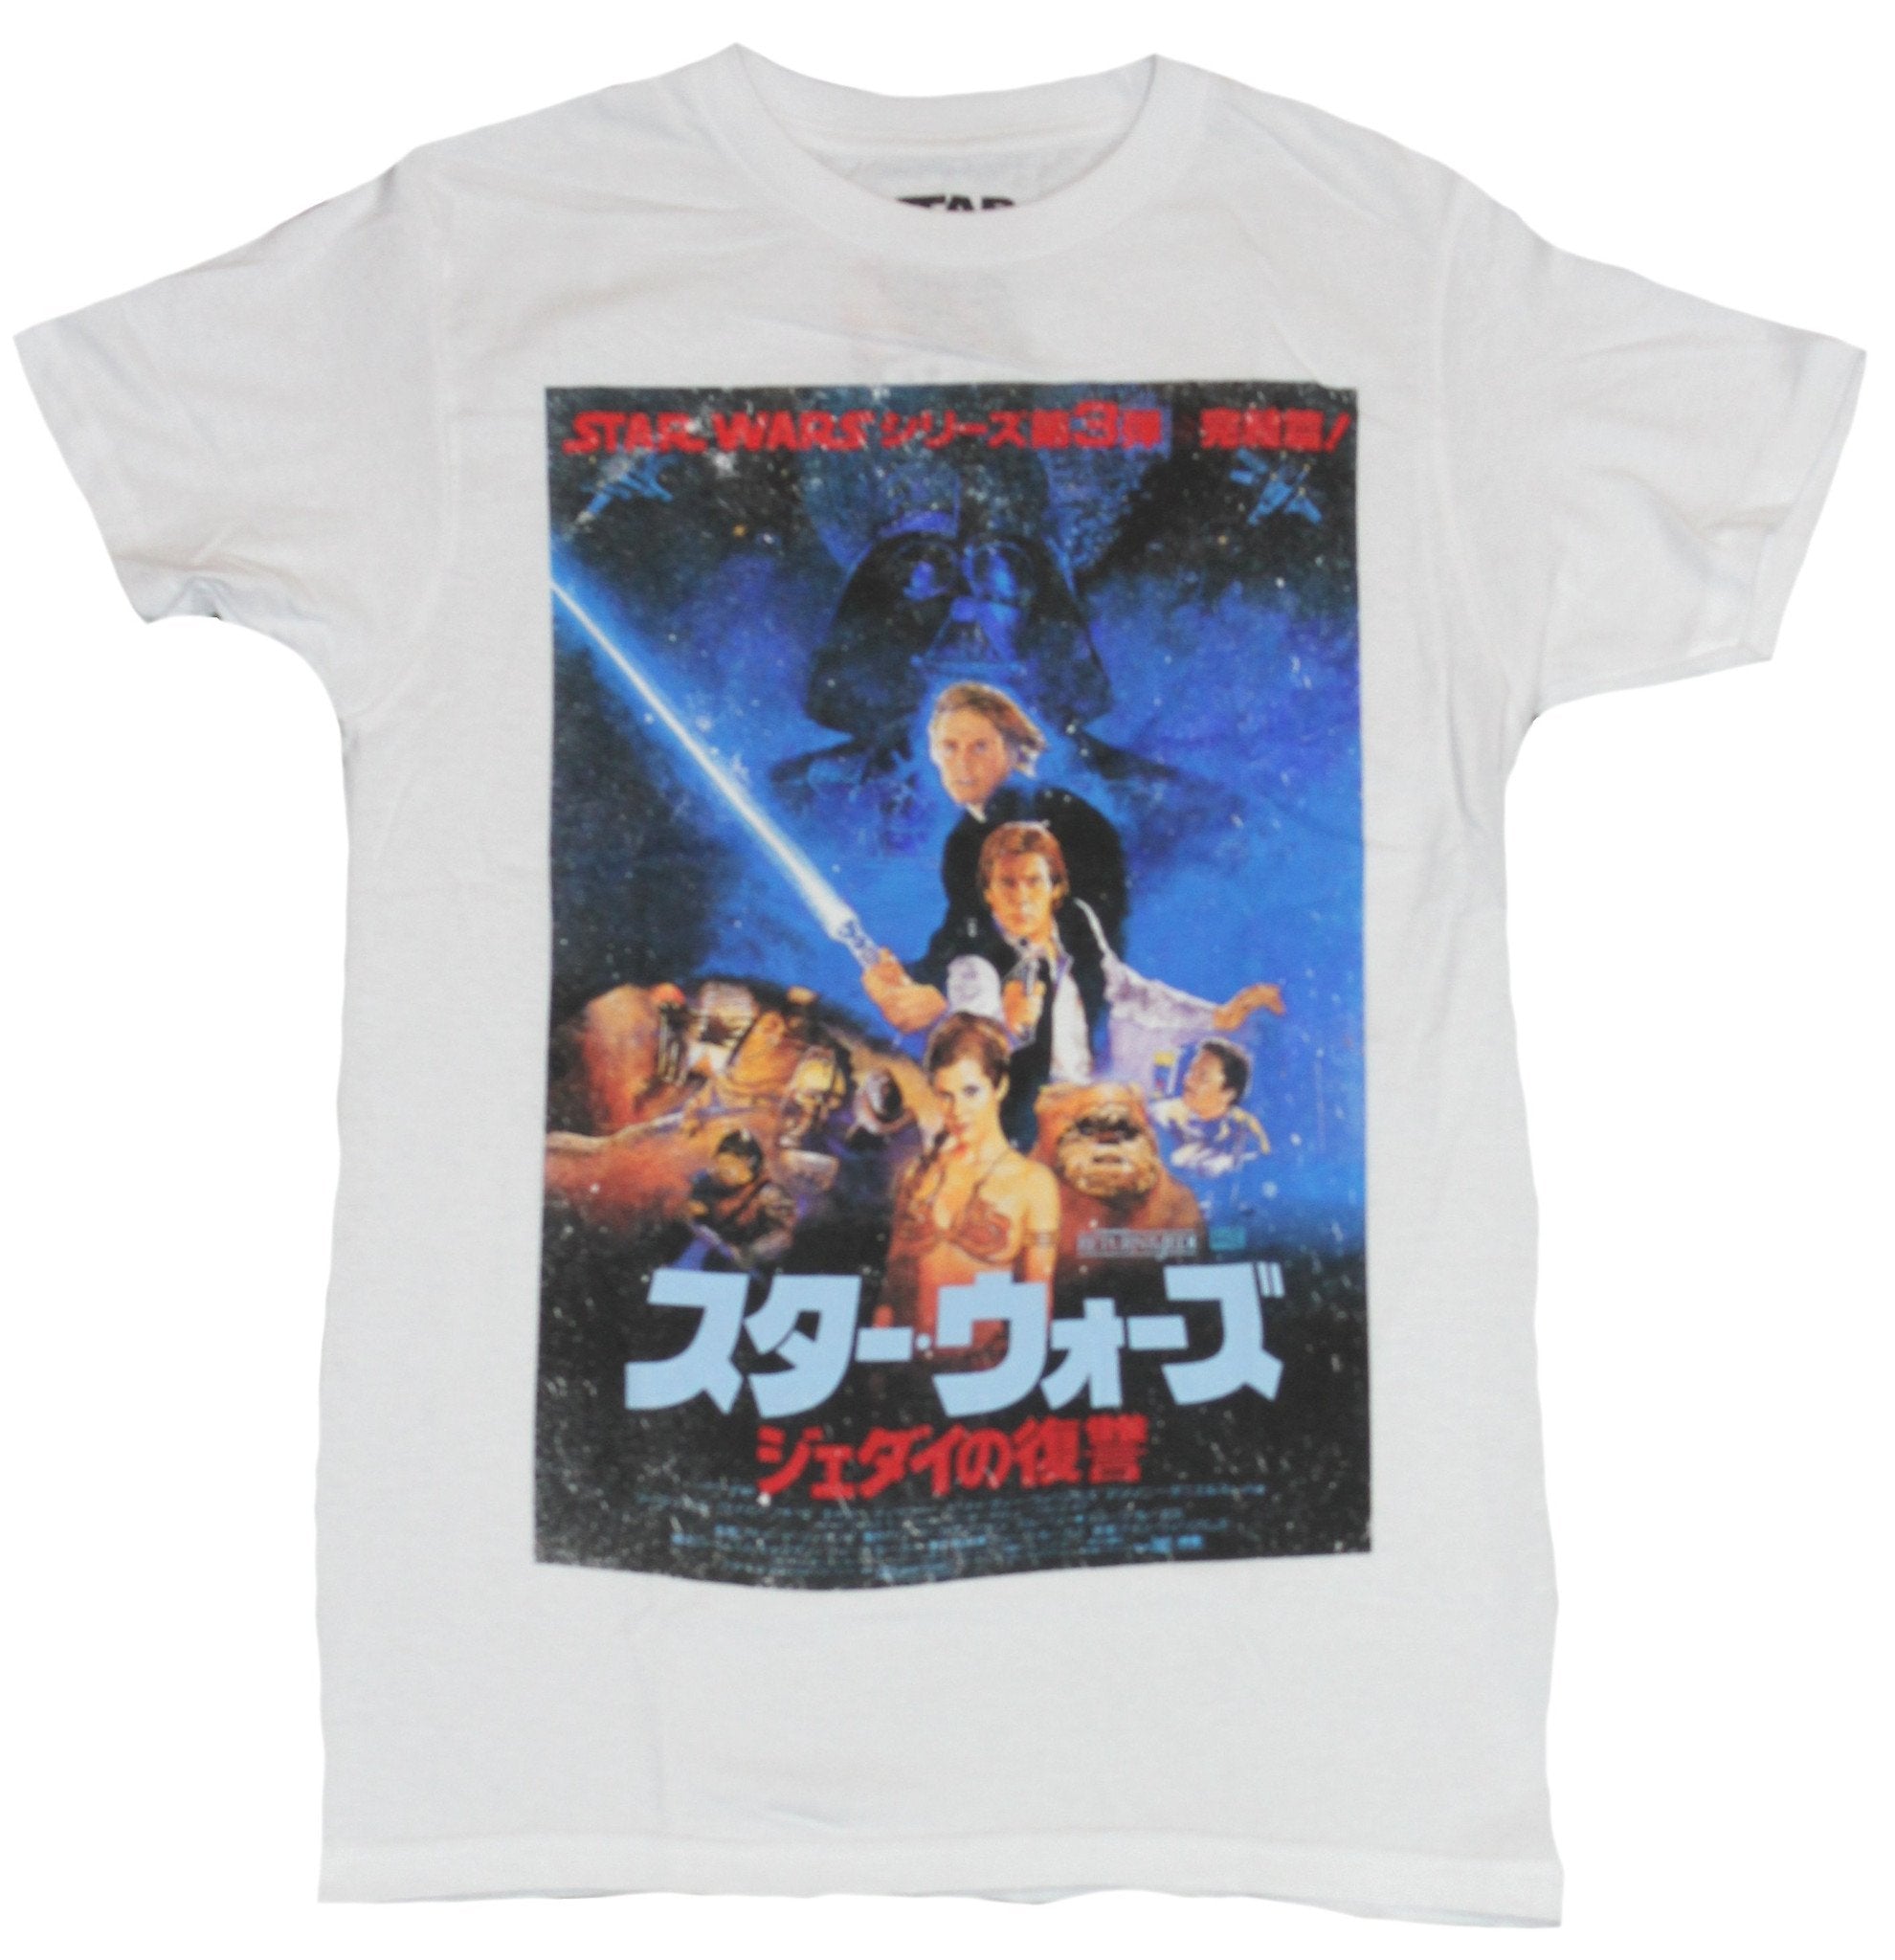 Star Wars Mens T-Shirt - Classic Return of Jedi Japanese Style Poster Image